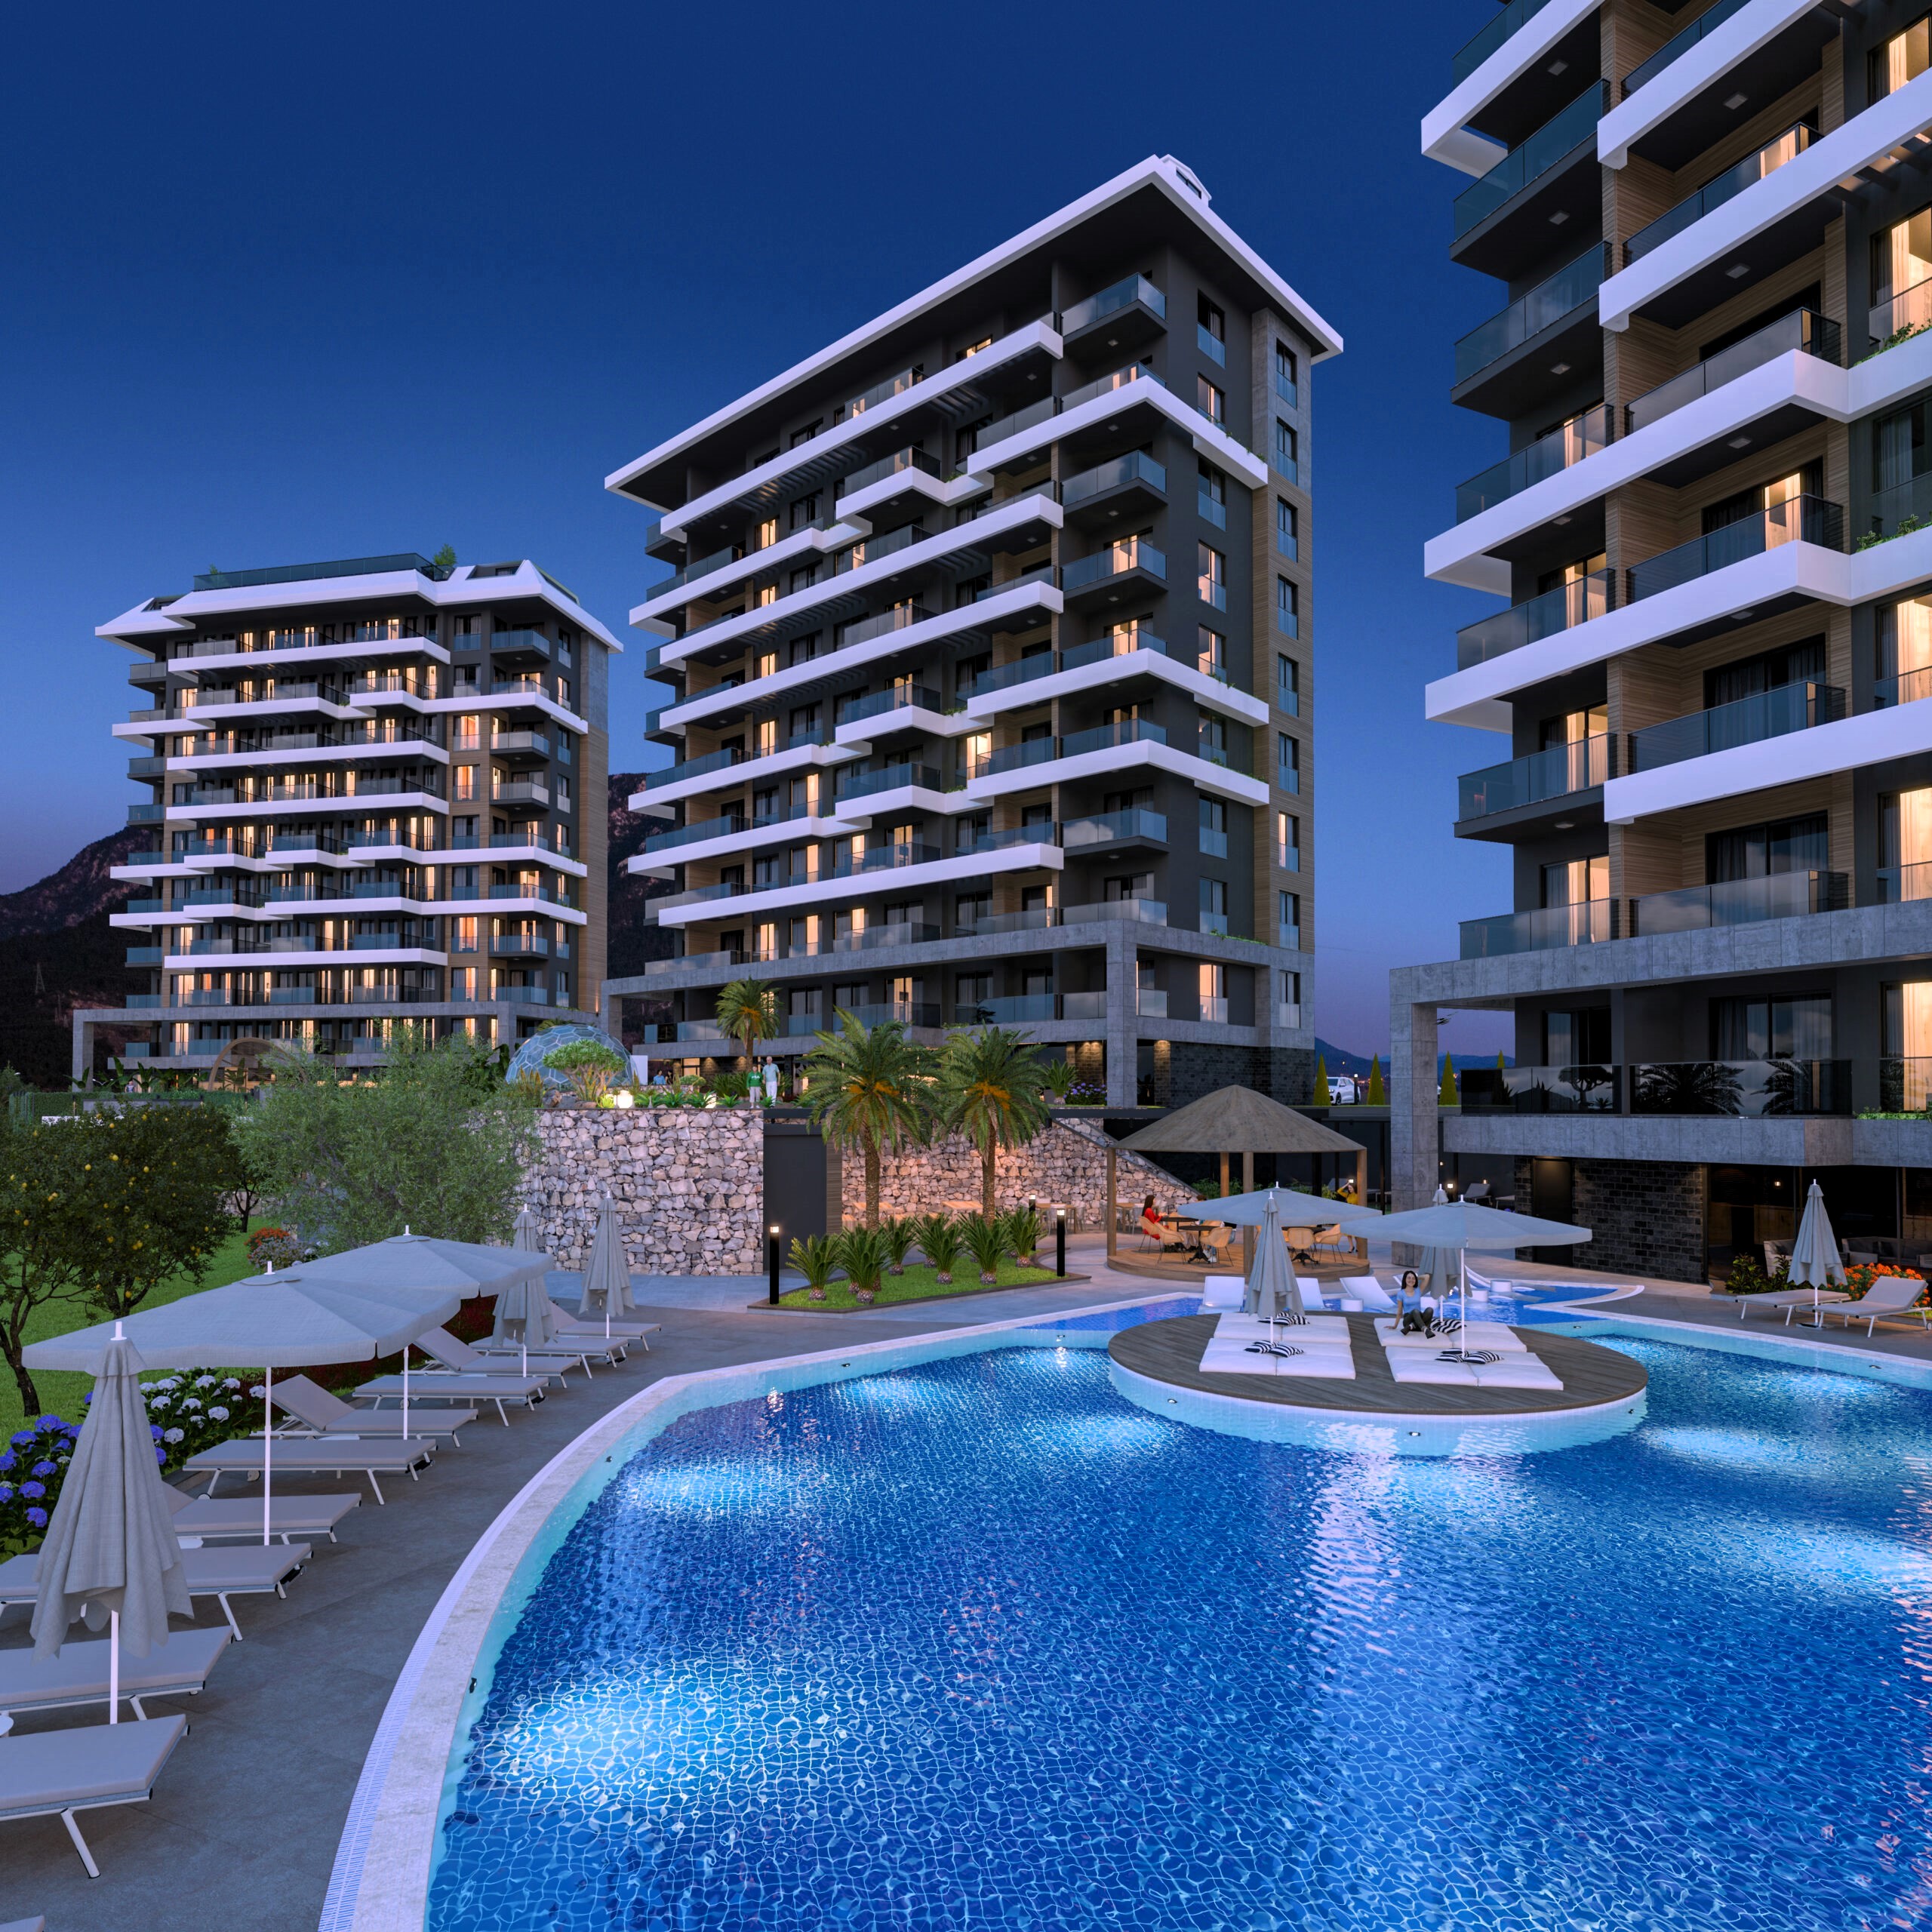 Residential complex under construction in Kestel - a popular area of Alanya with wonderful views of the sea and mountains